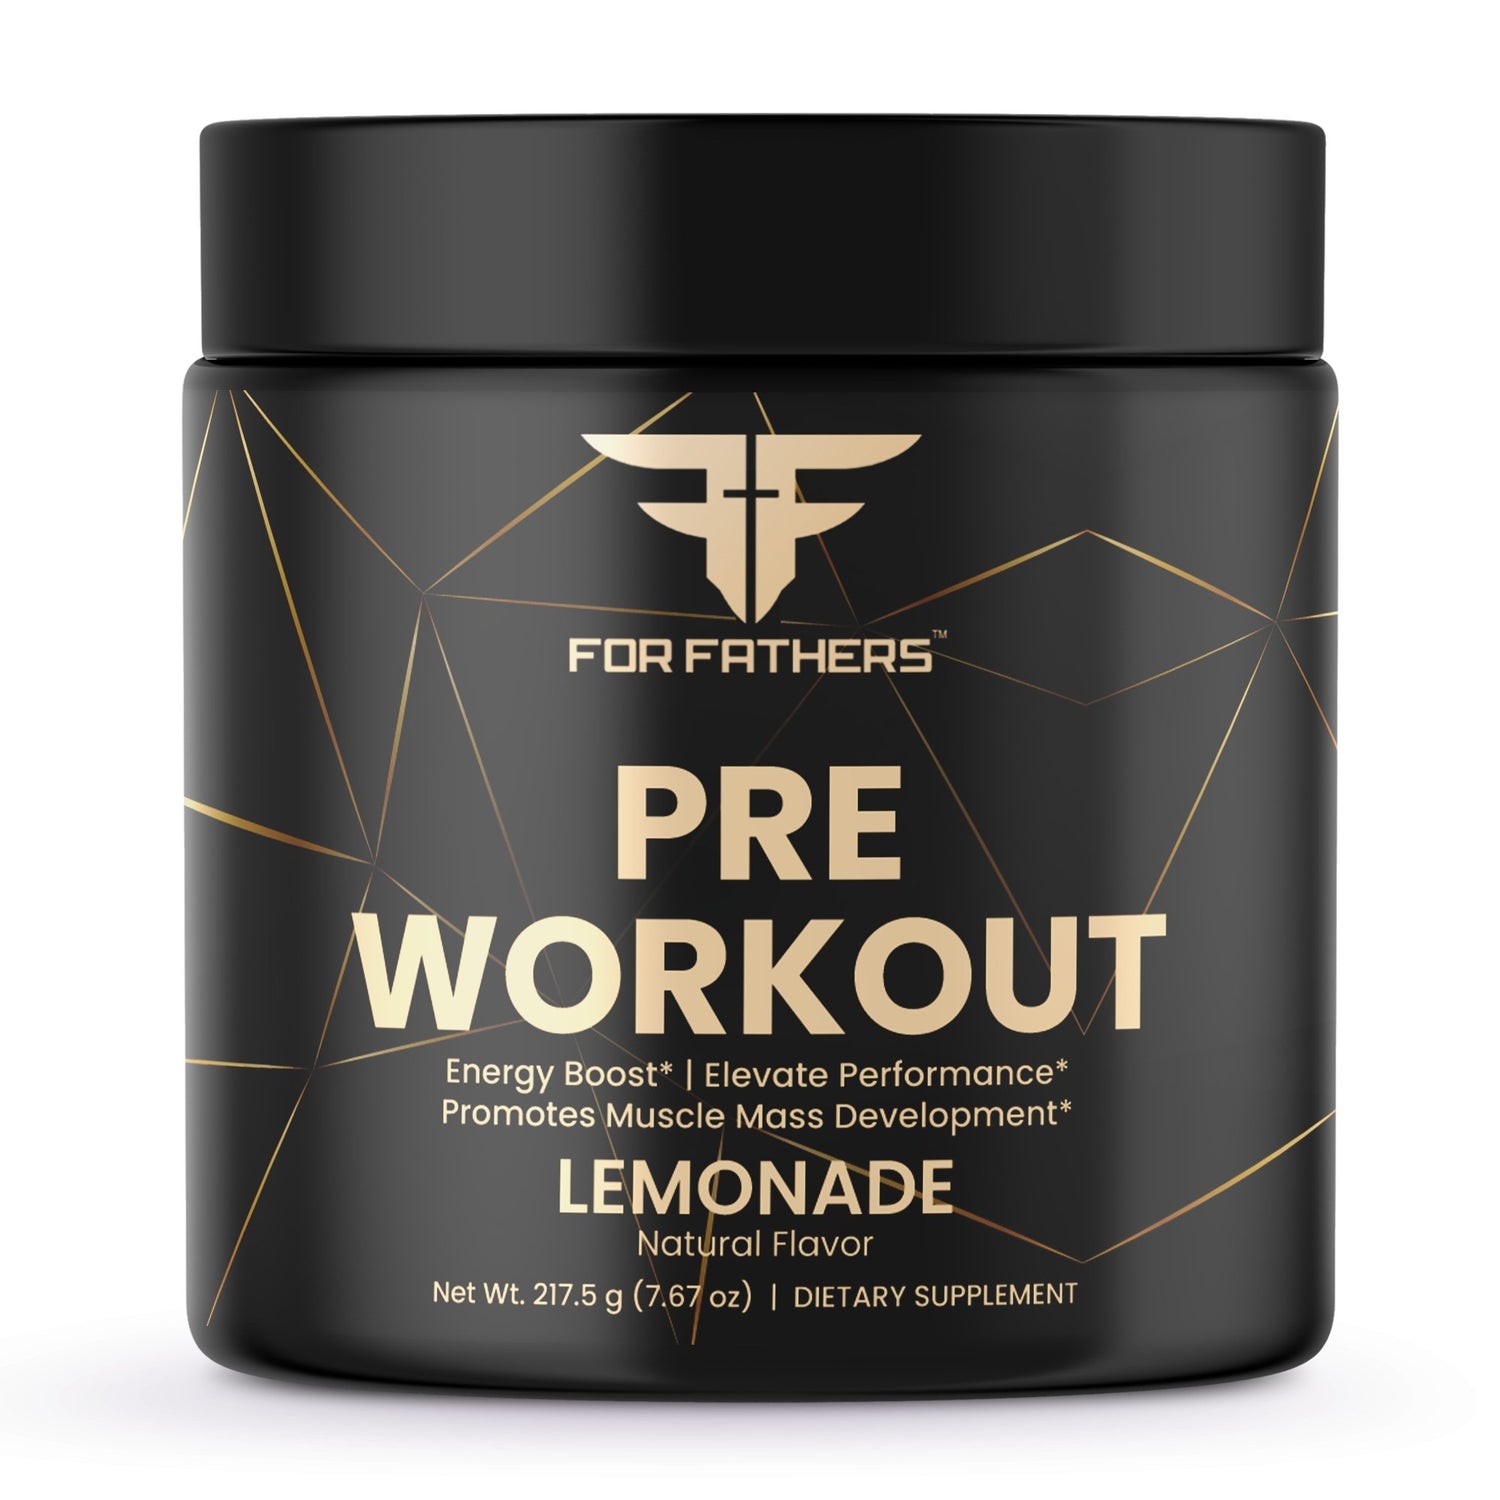 Pre-Workout Energy Drink Mix - Lemonade Flavor - For Fathers Fitness